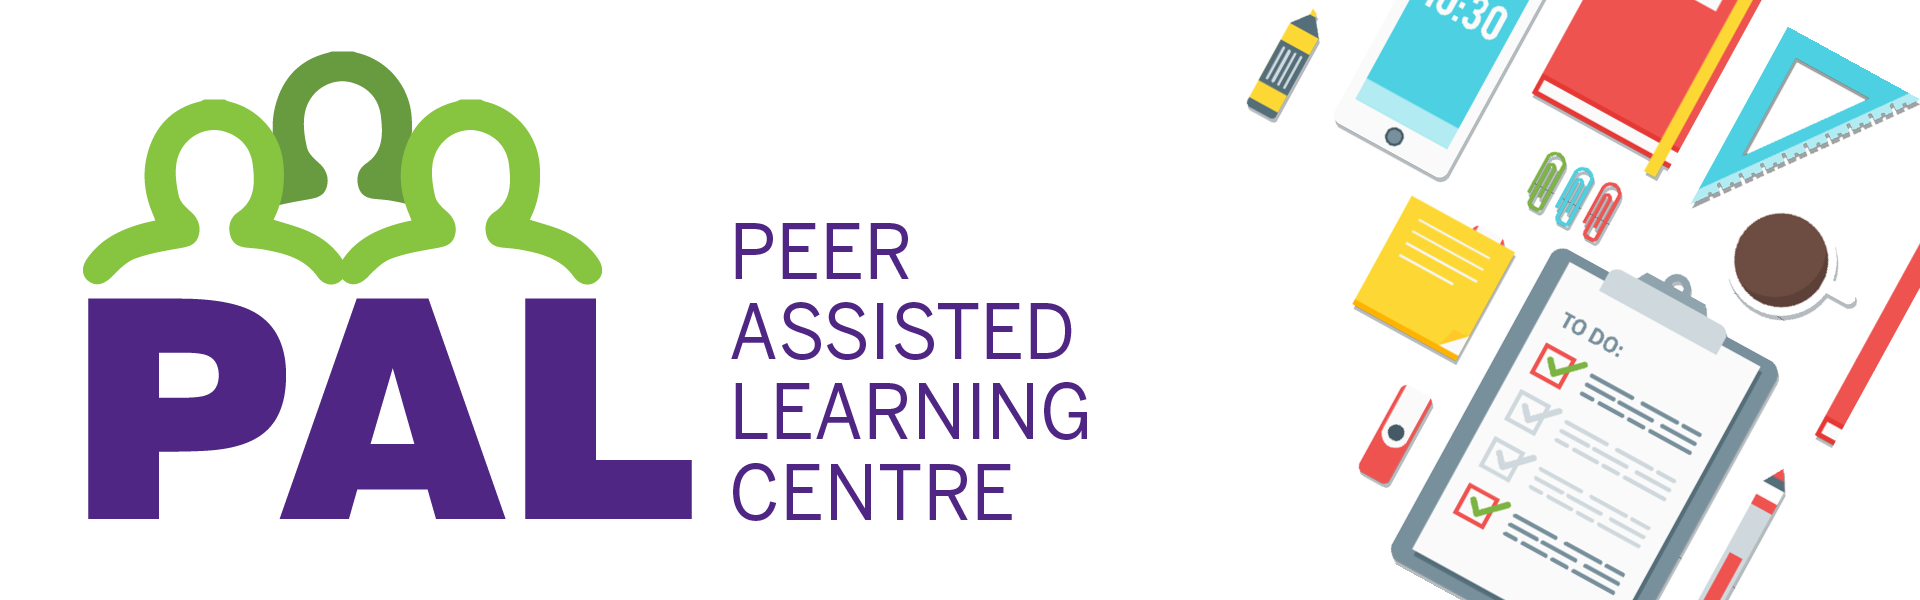 Colourful graphics of different learning icons with text reading Peer Assisted Learning